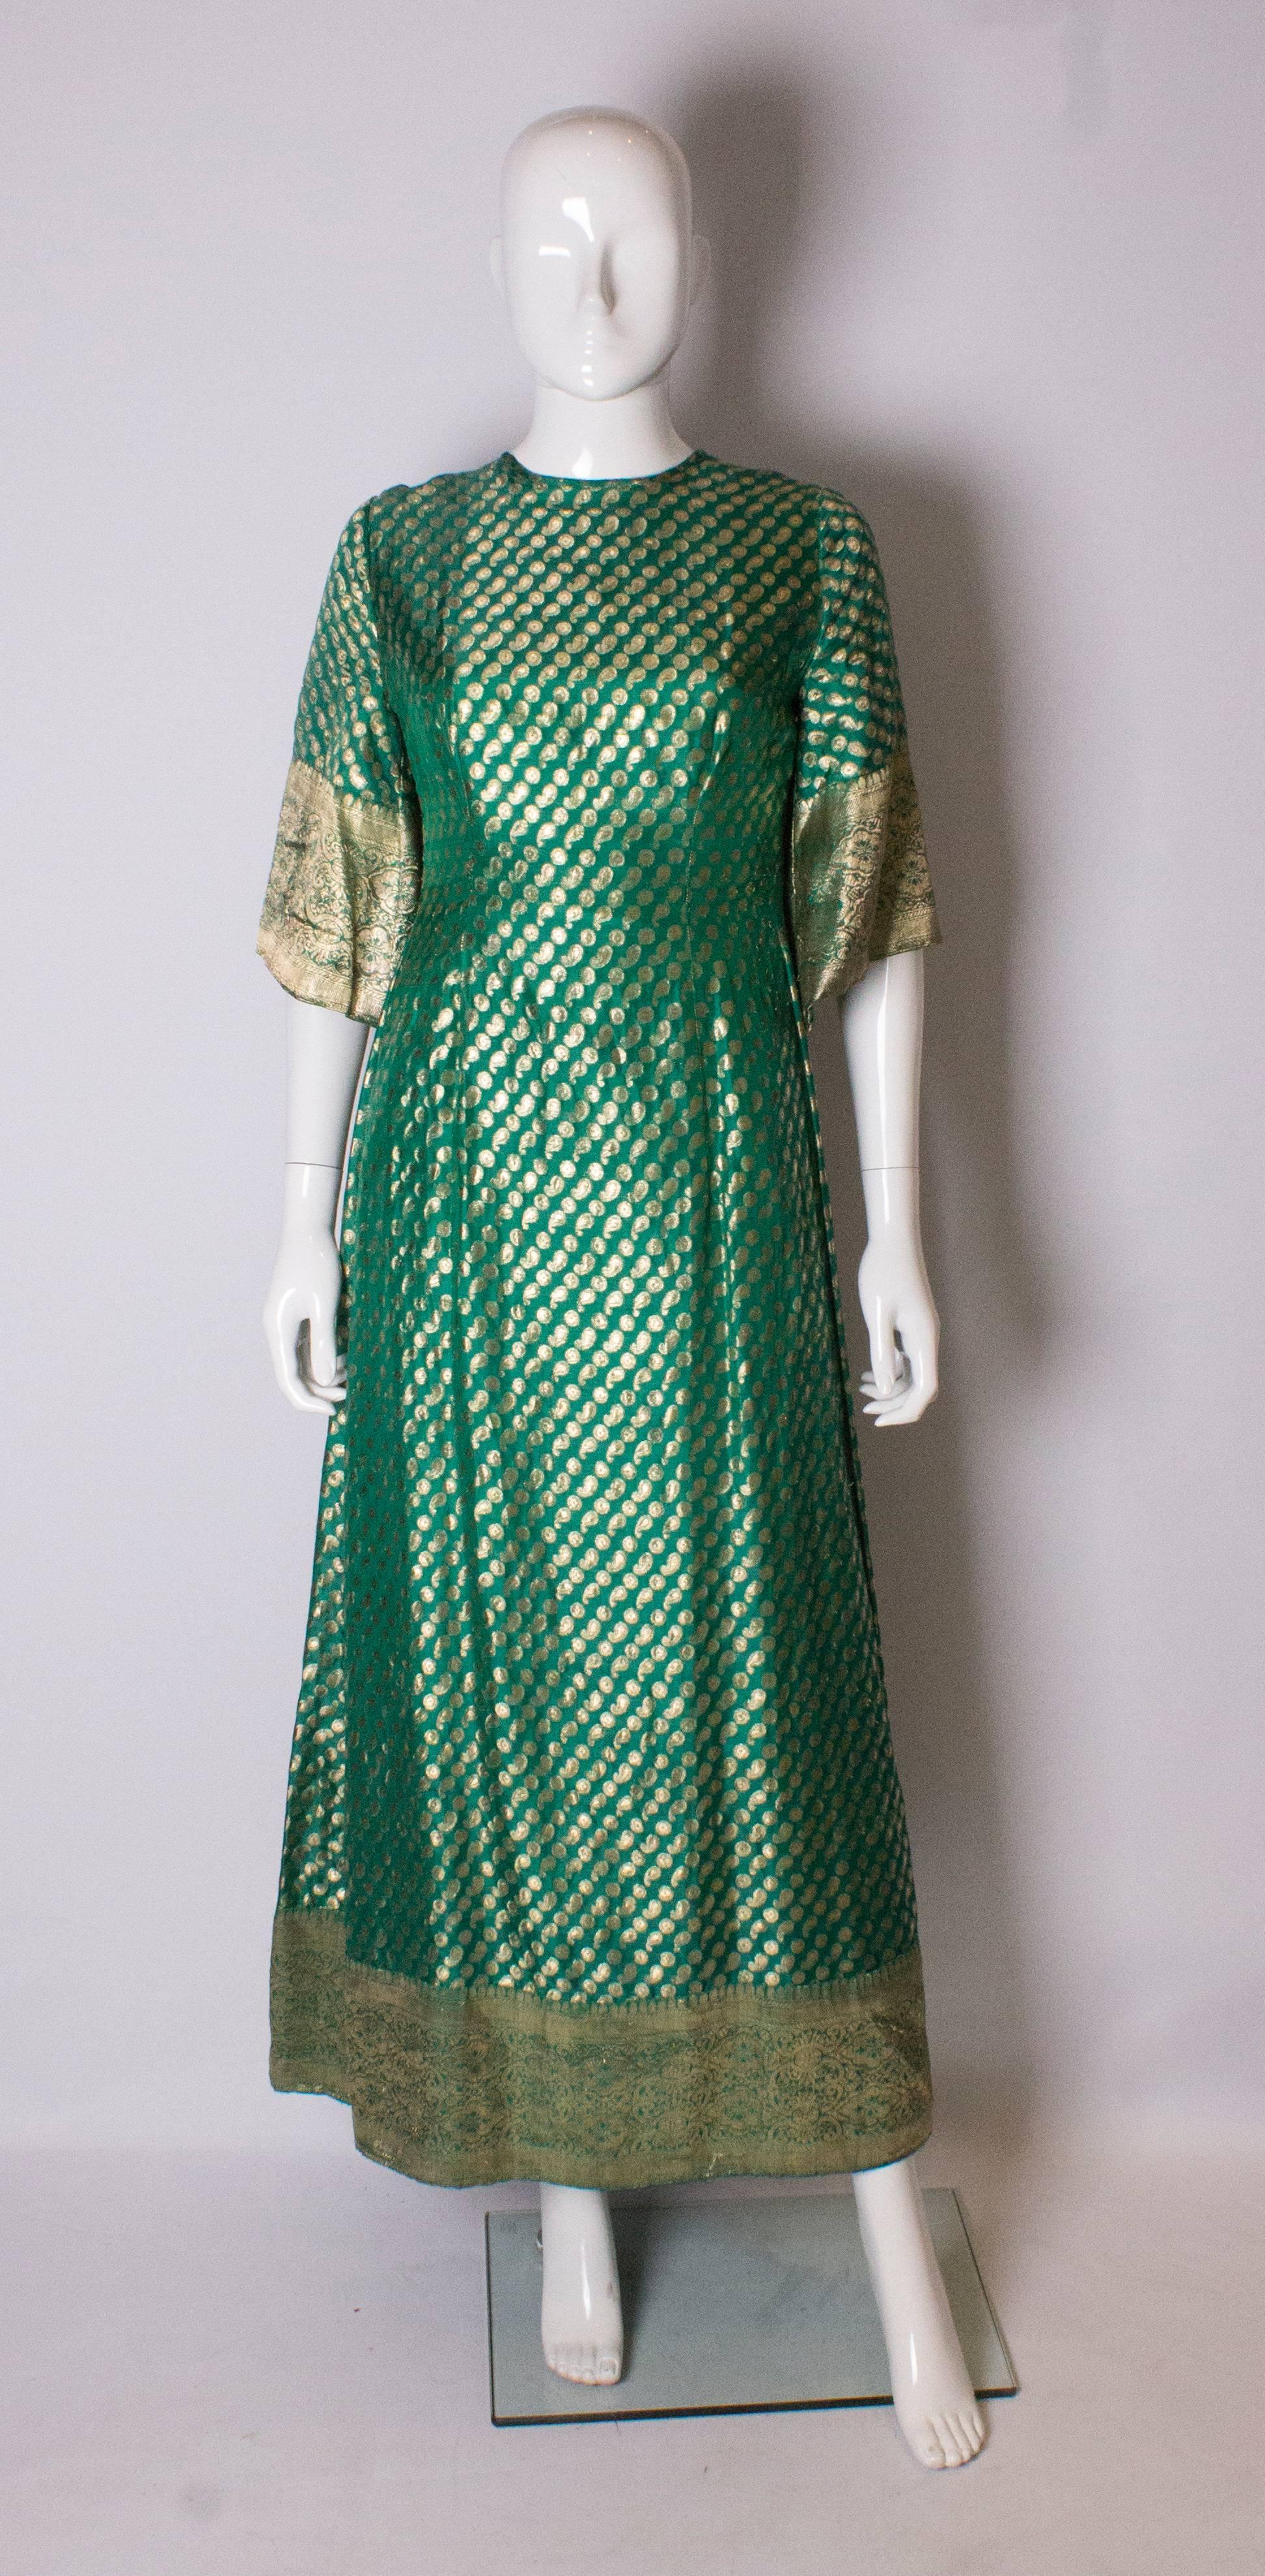 A stunning Indian silk gown in green and gold. The dress has a round neckline at the front, and a v neckline at the back with gathering.  It has elbow length sleeves and wide gold detail at the hem.